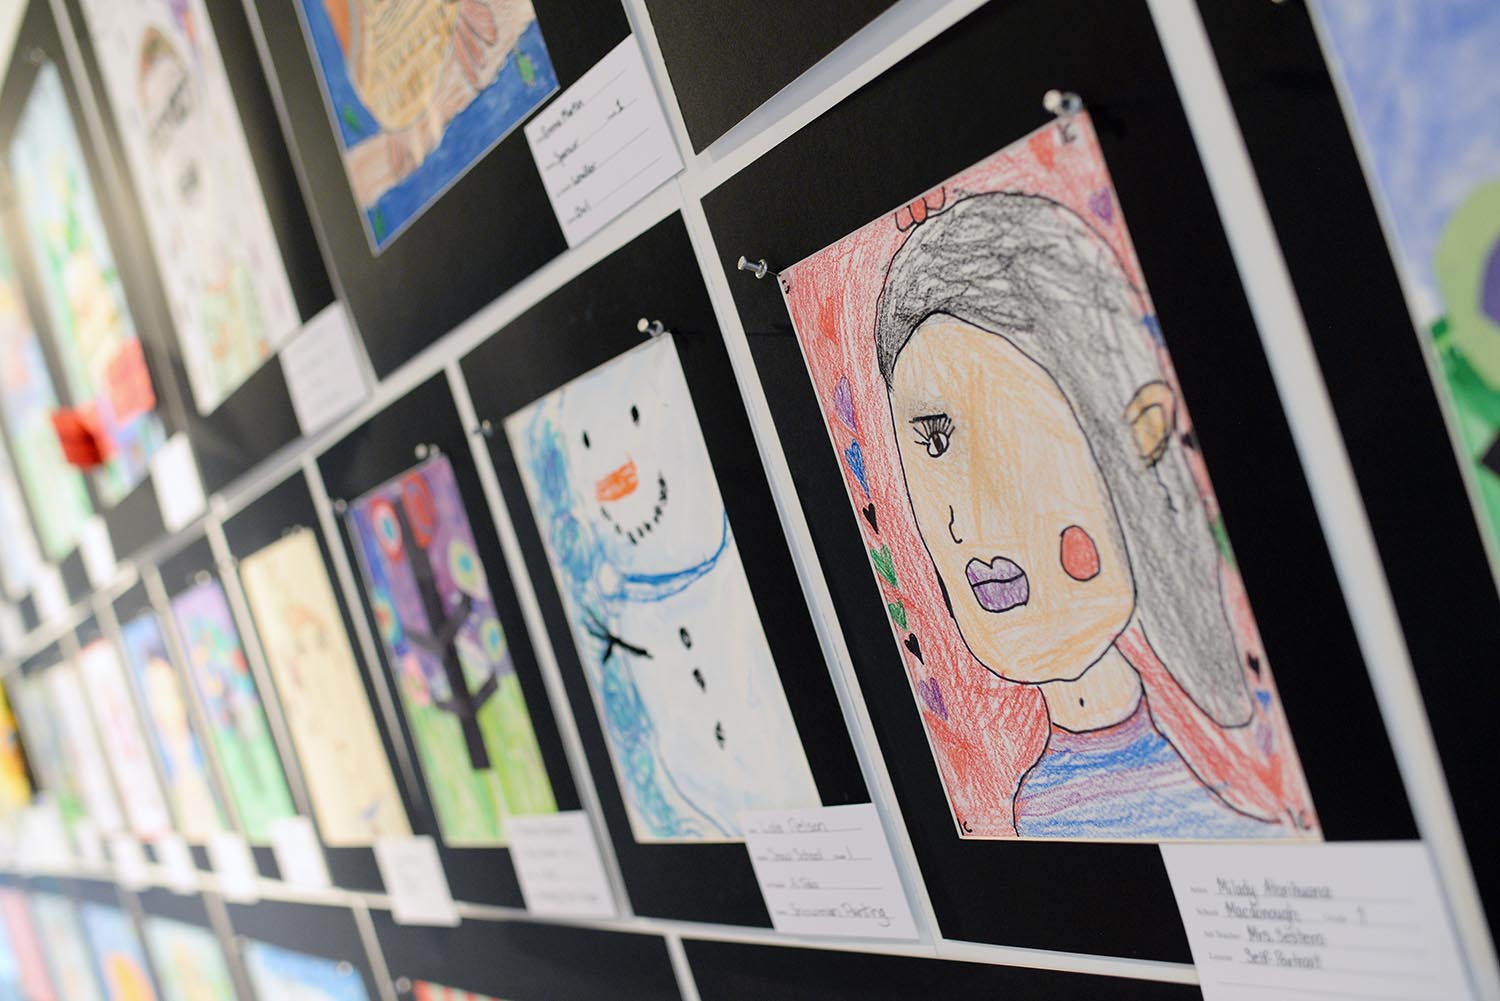 Milady, a first grader at Macdonough Elementary School, created this self portraitt with crayons.